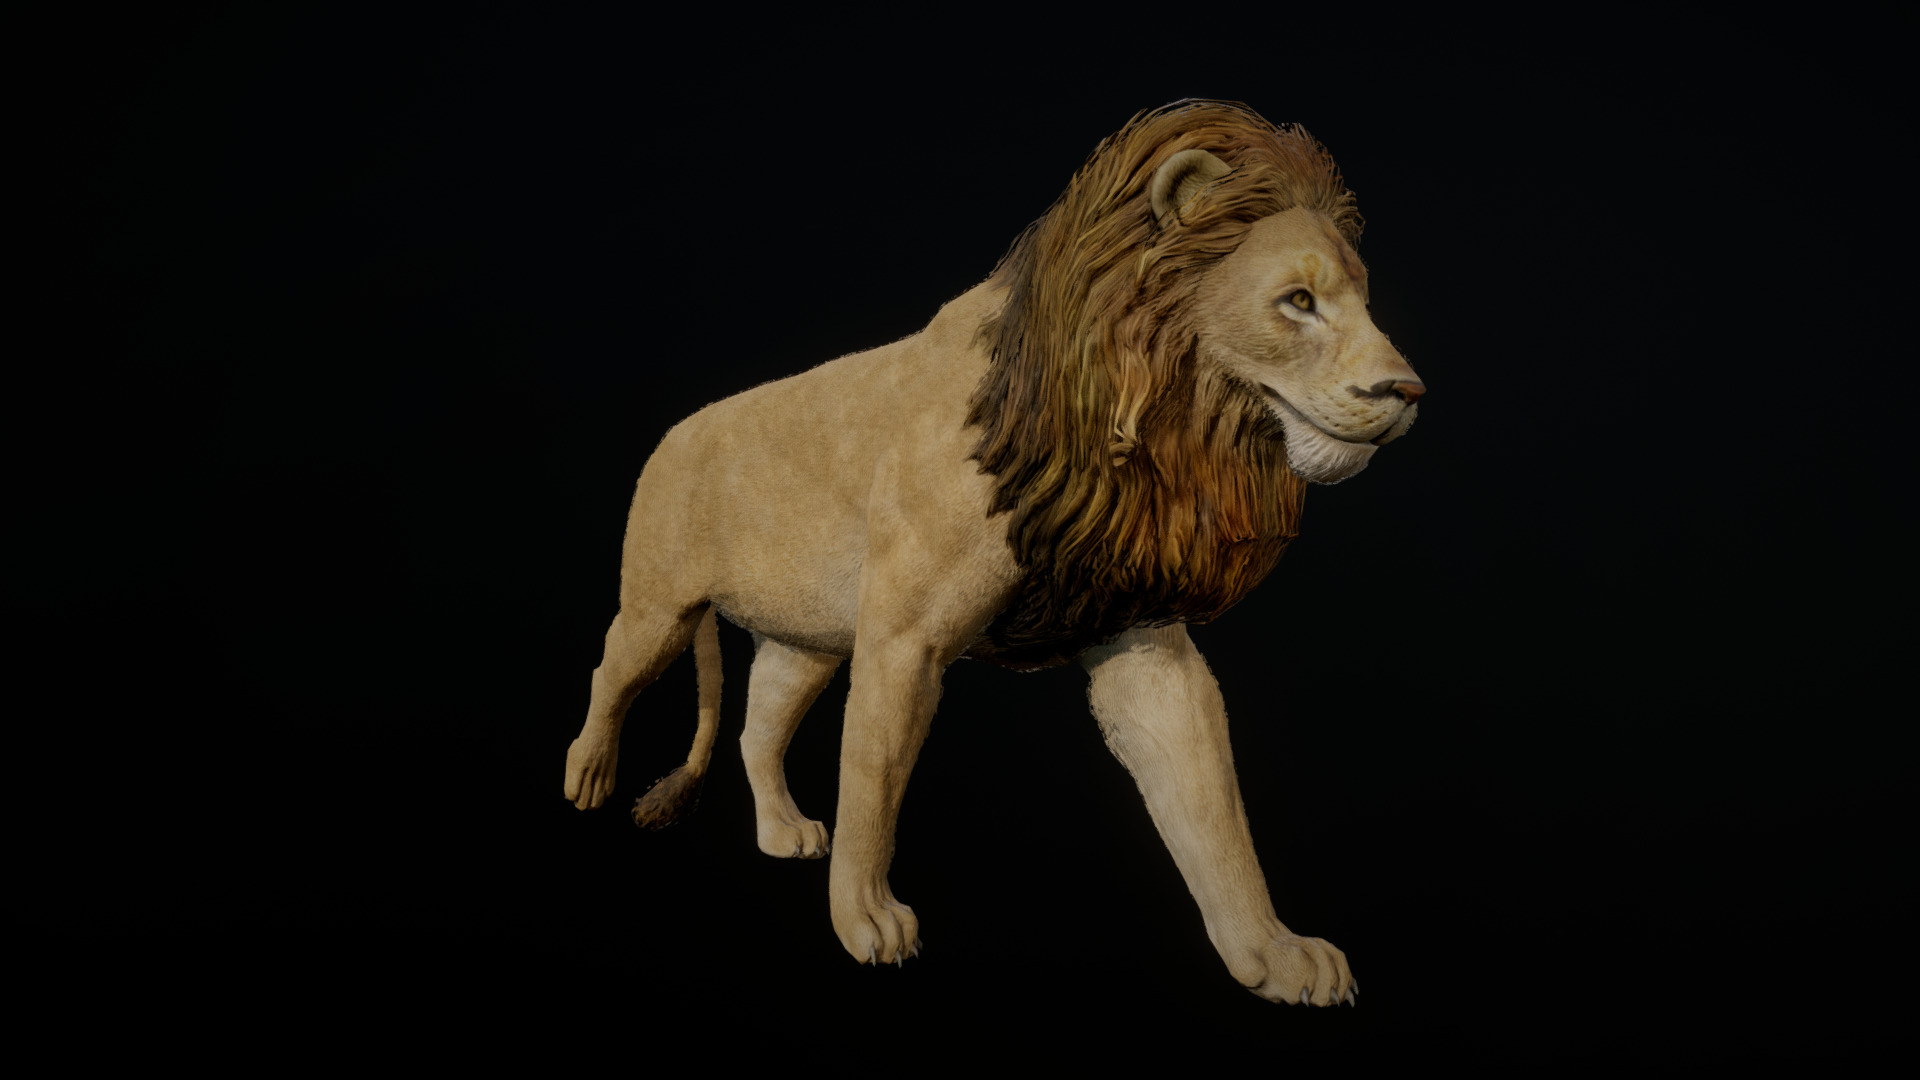 3D model LION ANIMATIONS - This is a 3D model of the LION ANIMATIONS. The 3D model is about a lion walking on a black background.